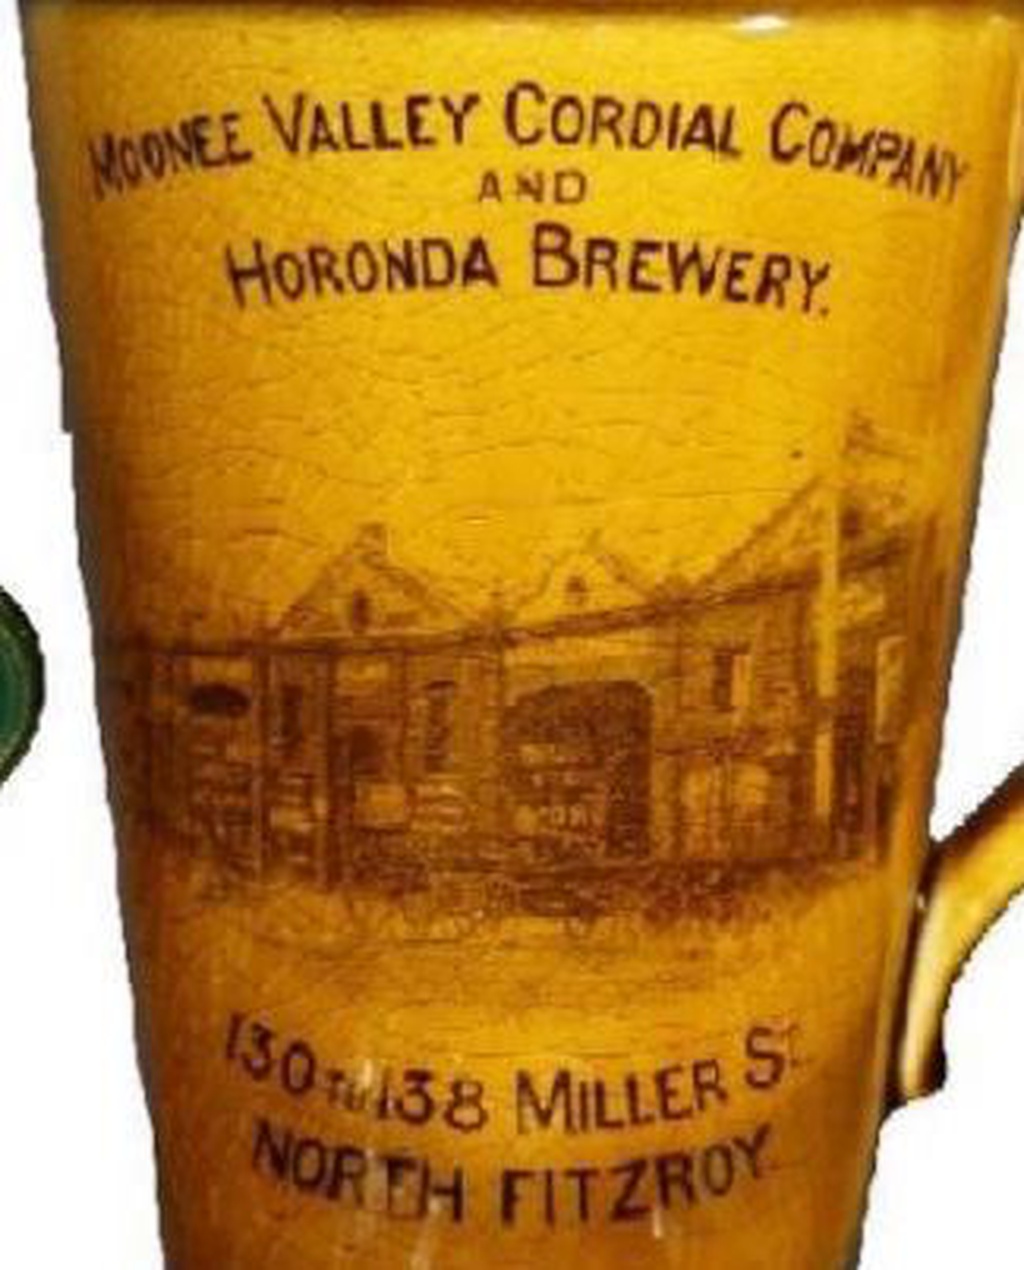 Detail from a company promotional jug